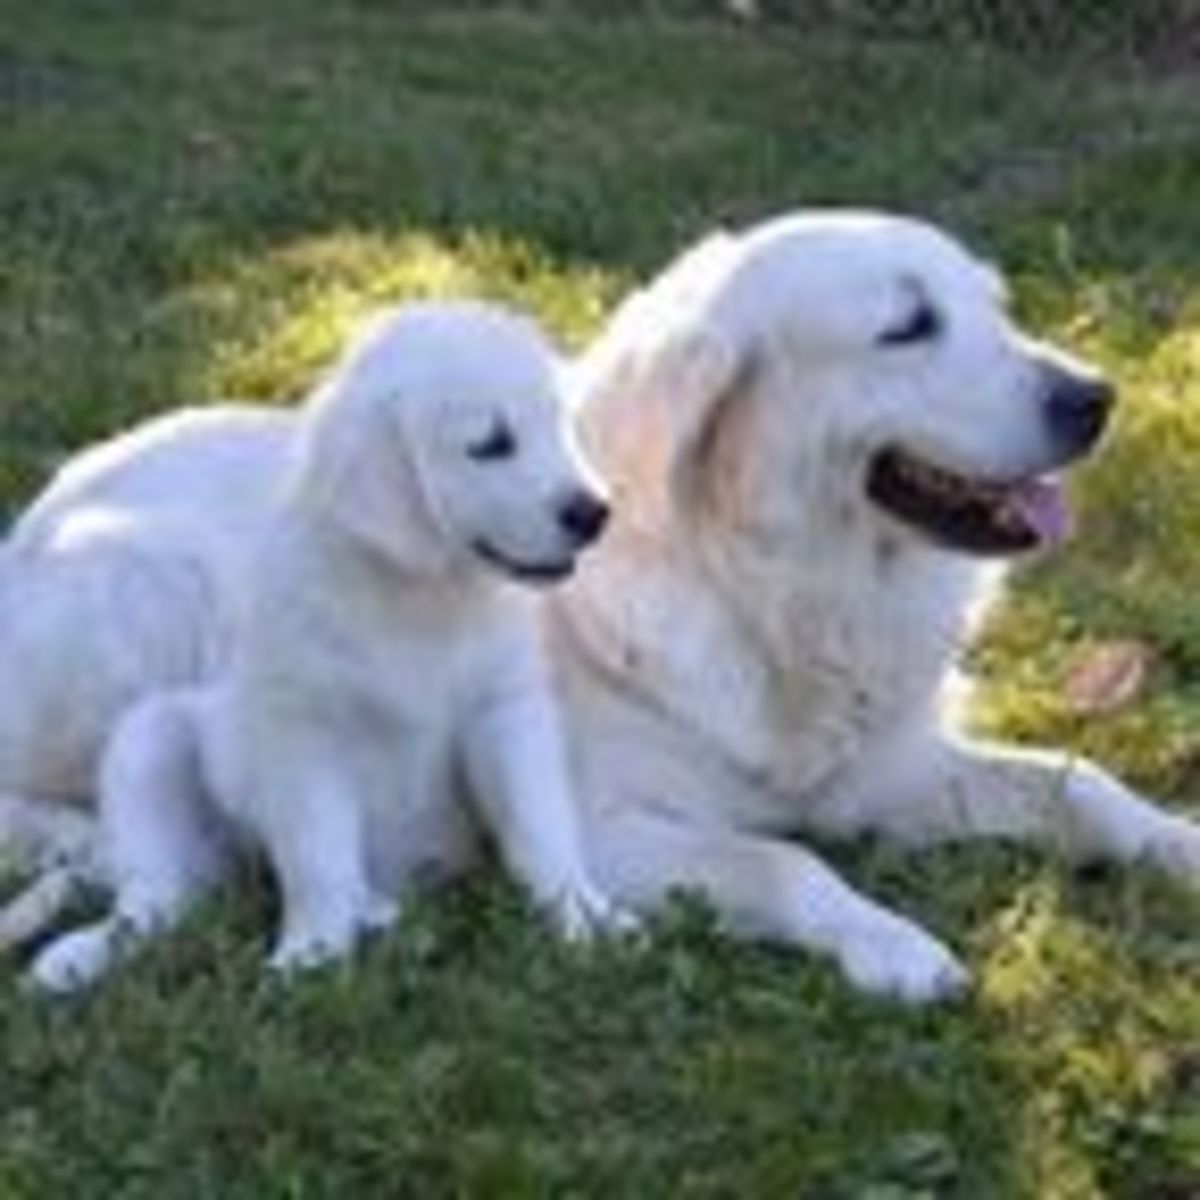 breeding father to daughter dogs